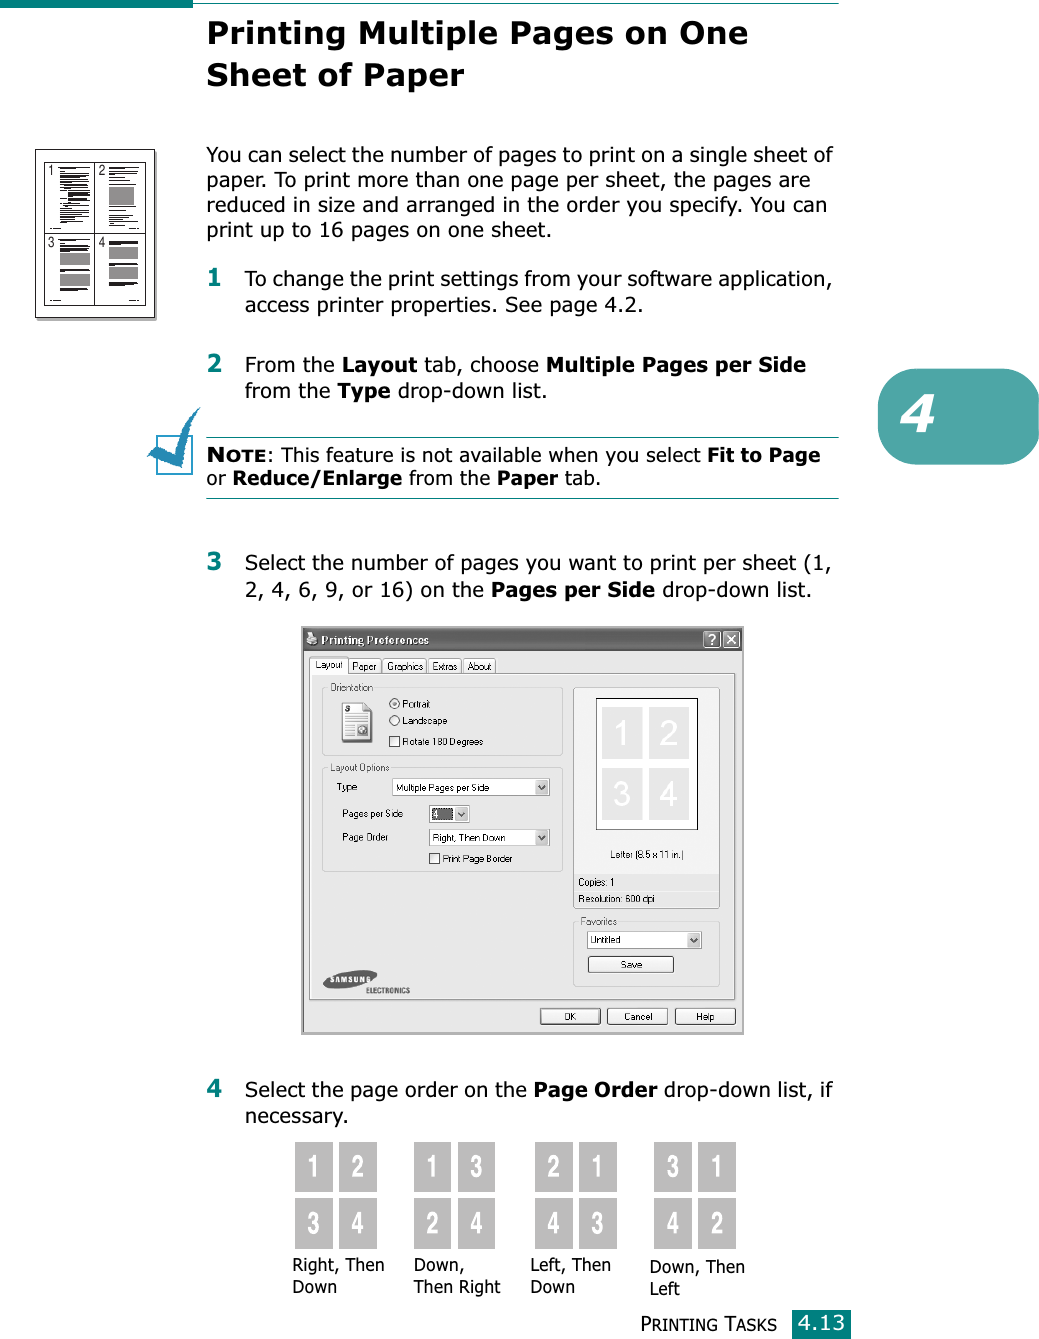 PRINTING TASKS4.134Printing Multiple Pages on One Sheet of Paper You can select the number of pages to print on a single sheet of paper. To print more than one page per sheet, the pages are reduced in size and arranged in the order you specify. You can print up to 16 pages on one sheet. 1To change the print settings from your software application, access printer properties. See page 4.2.2From the Layout tab, choose Multiple Pages per Side from the Type drop-down list. NOTE: This feature is not available when you select Fit to Page or Reduce/Enlarge from the Paper tab.3Select the number of pages you want to print per sheet (1, 2, 4, 6, 9, or 16) on the Pages per Side drop-down list.4Select the page order on the Page Order drop-down list, if necessary.1 23 4Right, Then DownDown, Then RightLeft, Then DownDown, Then Left